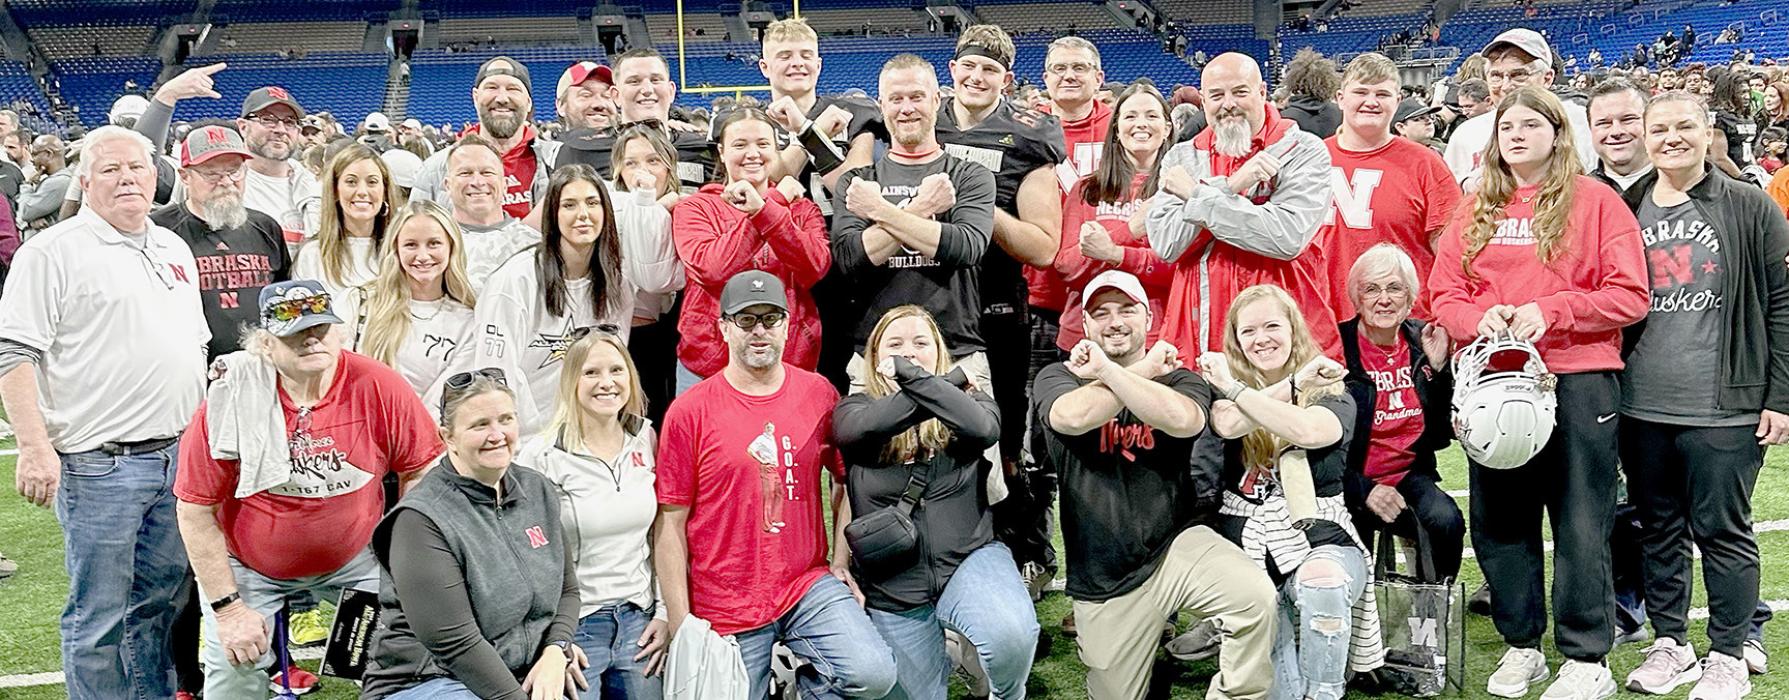 Family members, friends and coaches were present at the All-American Bowl in San Antonio, TX to cheer on three future Nebraska Cornhuskers, Carter Nelson, Gibson Pyle and Grant Brix.